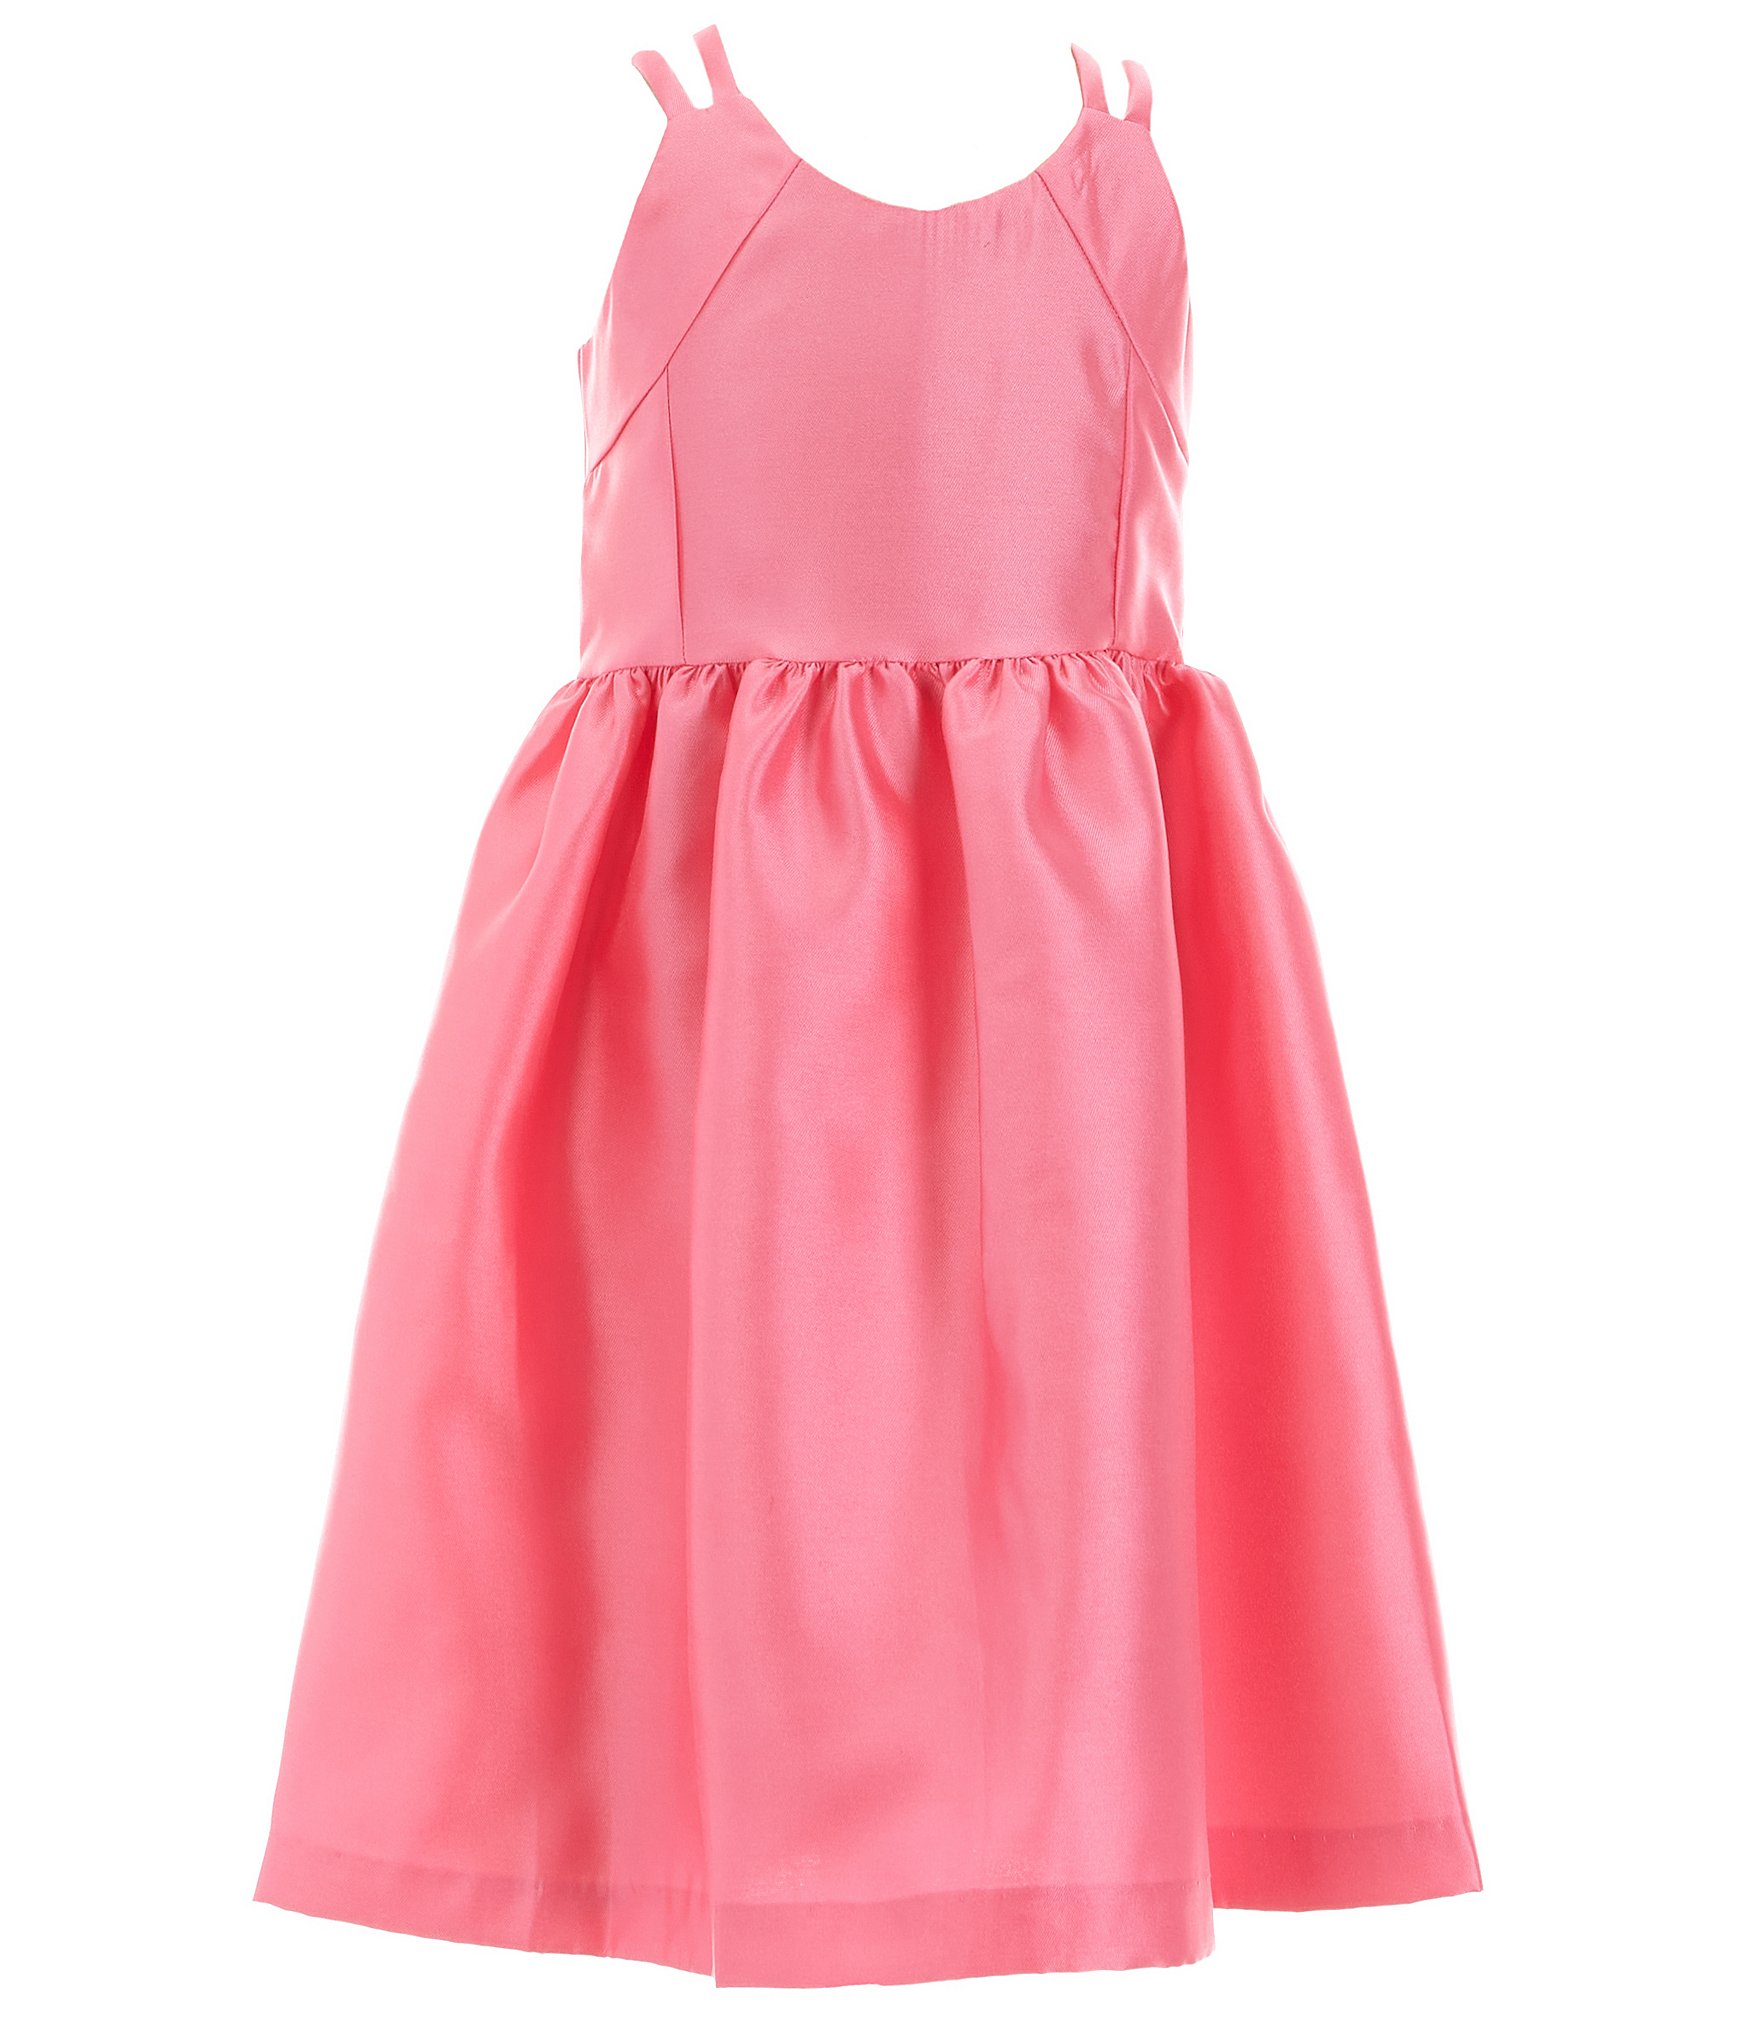 Kate Spade bow back fit and flare dress  Flare dress, Fit and flare dress,  Bow back dresses